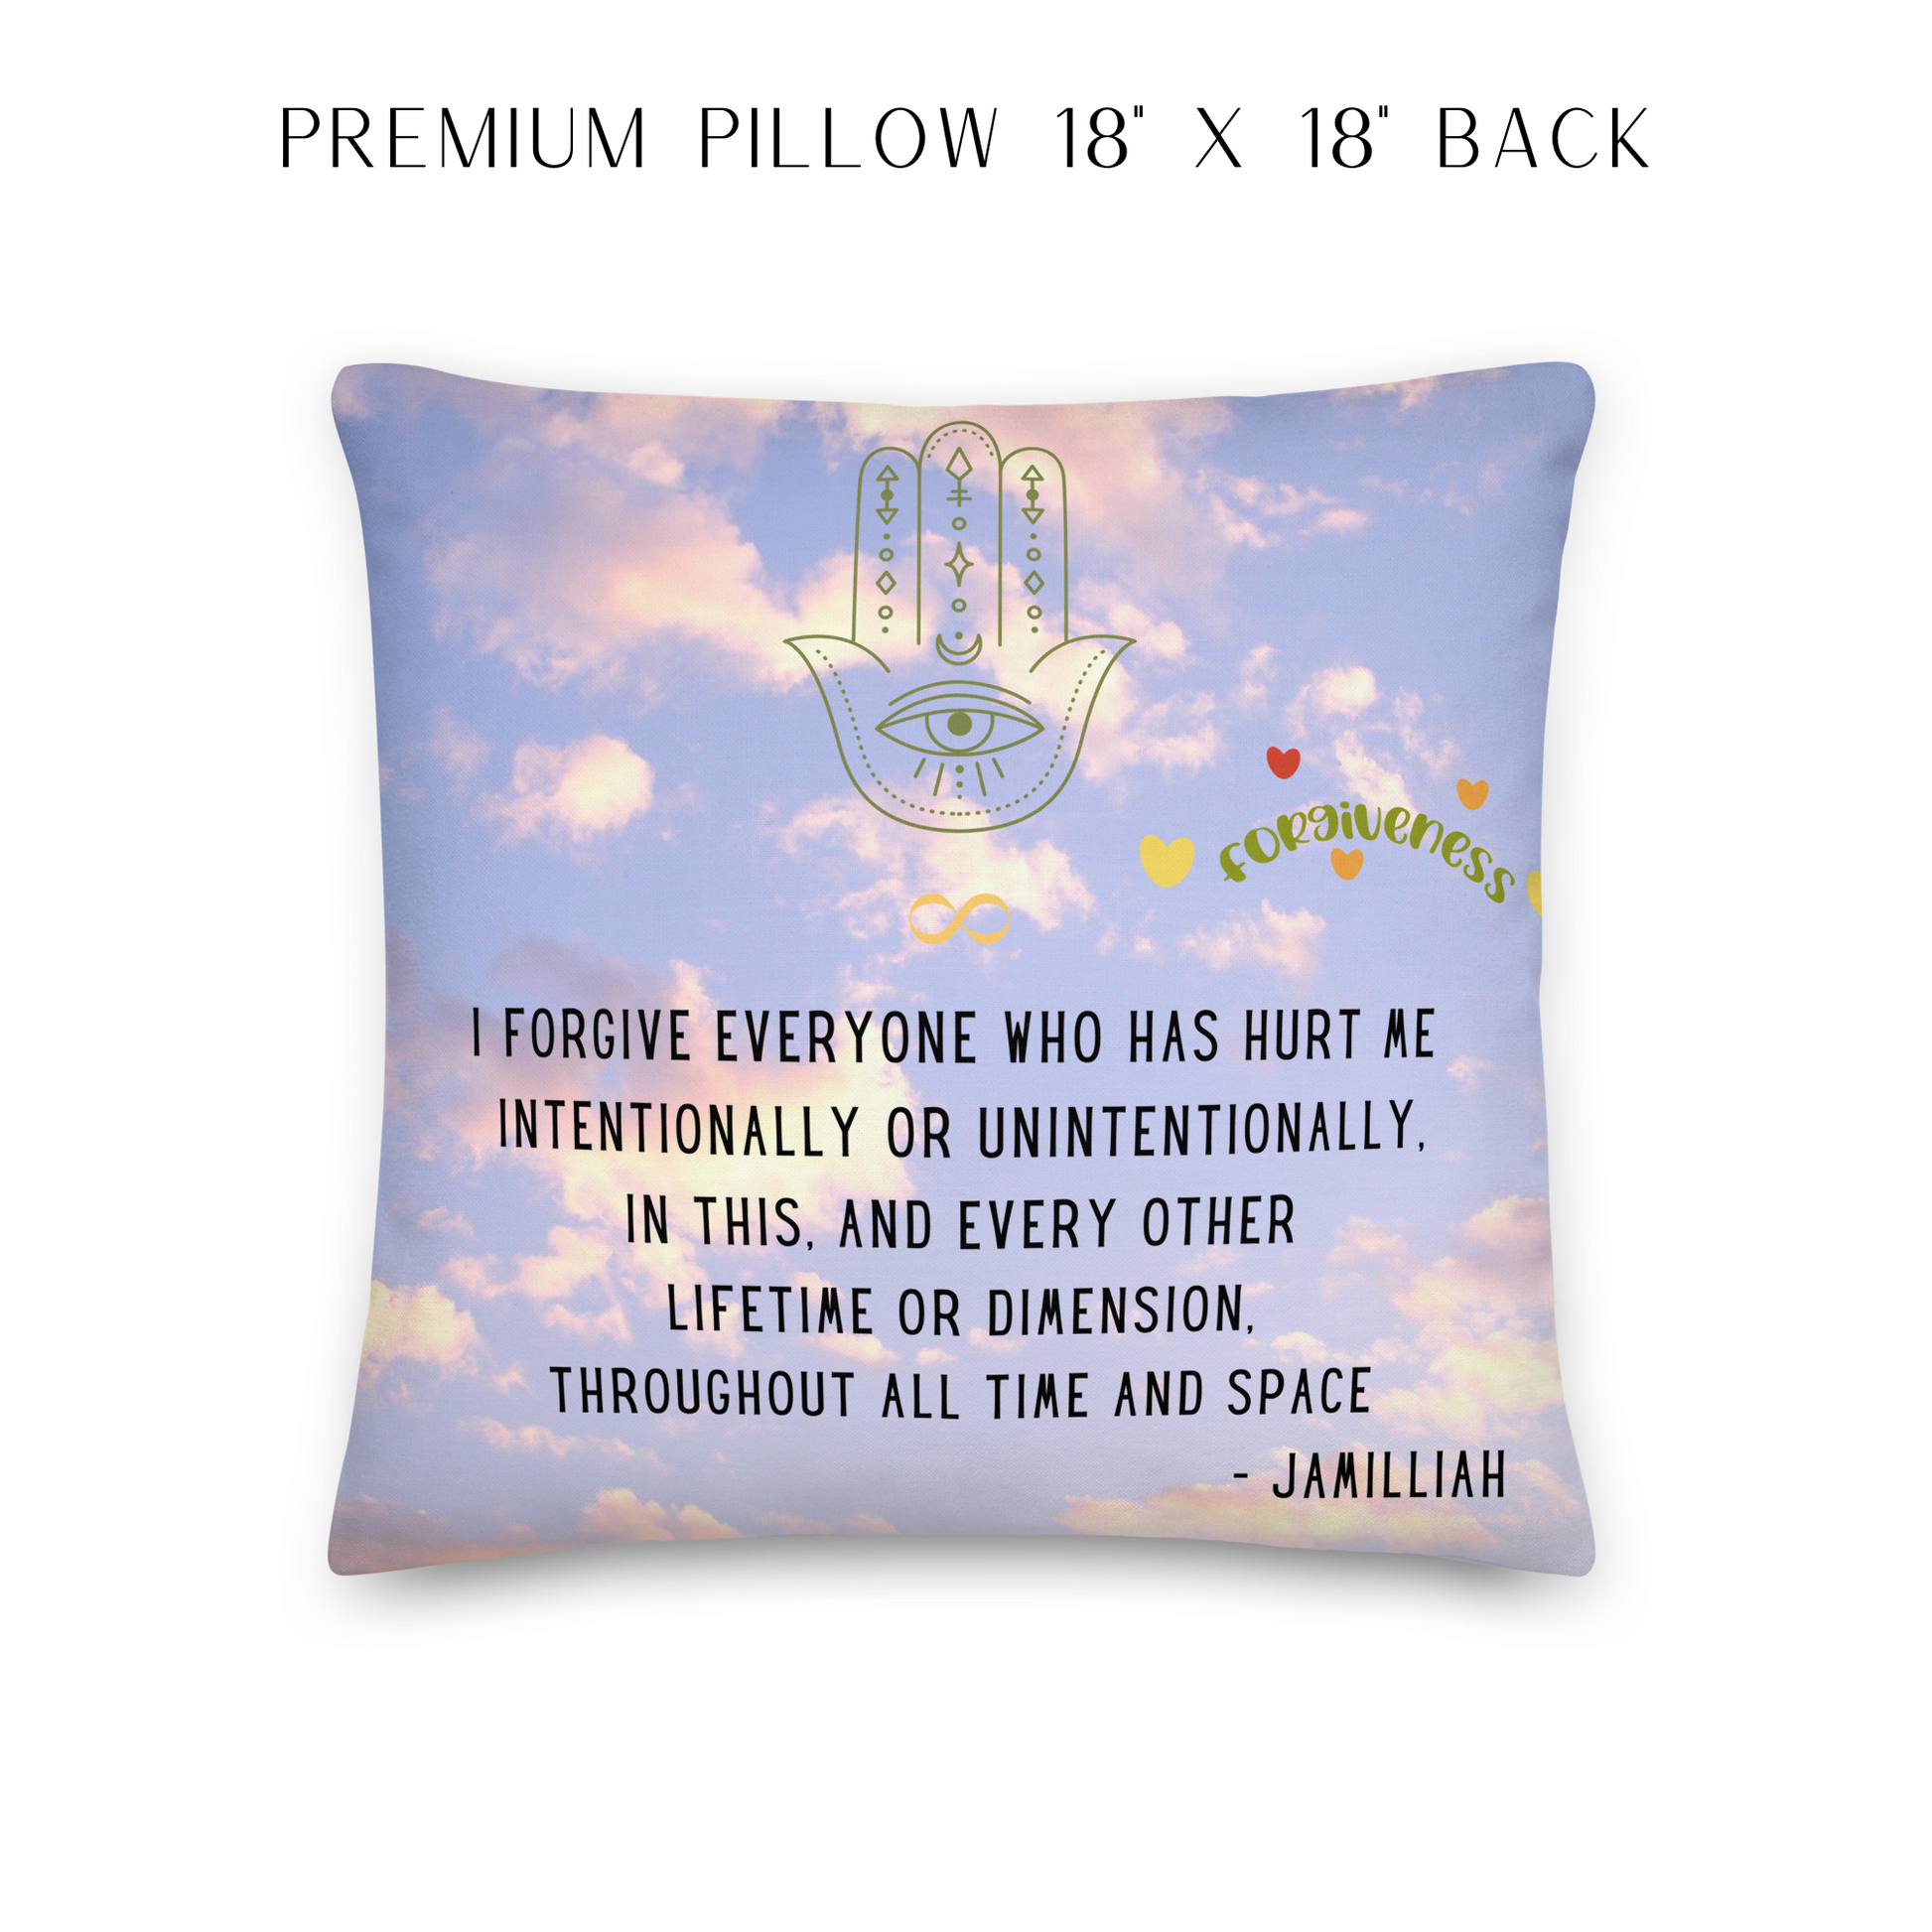 18x18 inch, all-over print premium pillow, back. Sky and clouds design with spiritual, hamsa hand/infinity sign brand logo image. Original wise quote mantra/saying/tagline/motto/slogan. "I Forgive Everyone Who Has Hurt Me Intentionally Or Unintentionally, In This, And Every Other Lifetime Or Dimension, Throughout All Time And Space. - Jamilliah." JAMILLIAH'S WISDOM IS TIMELESS SHOP - wisdomistimeless.com.